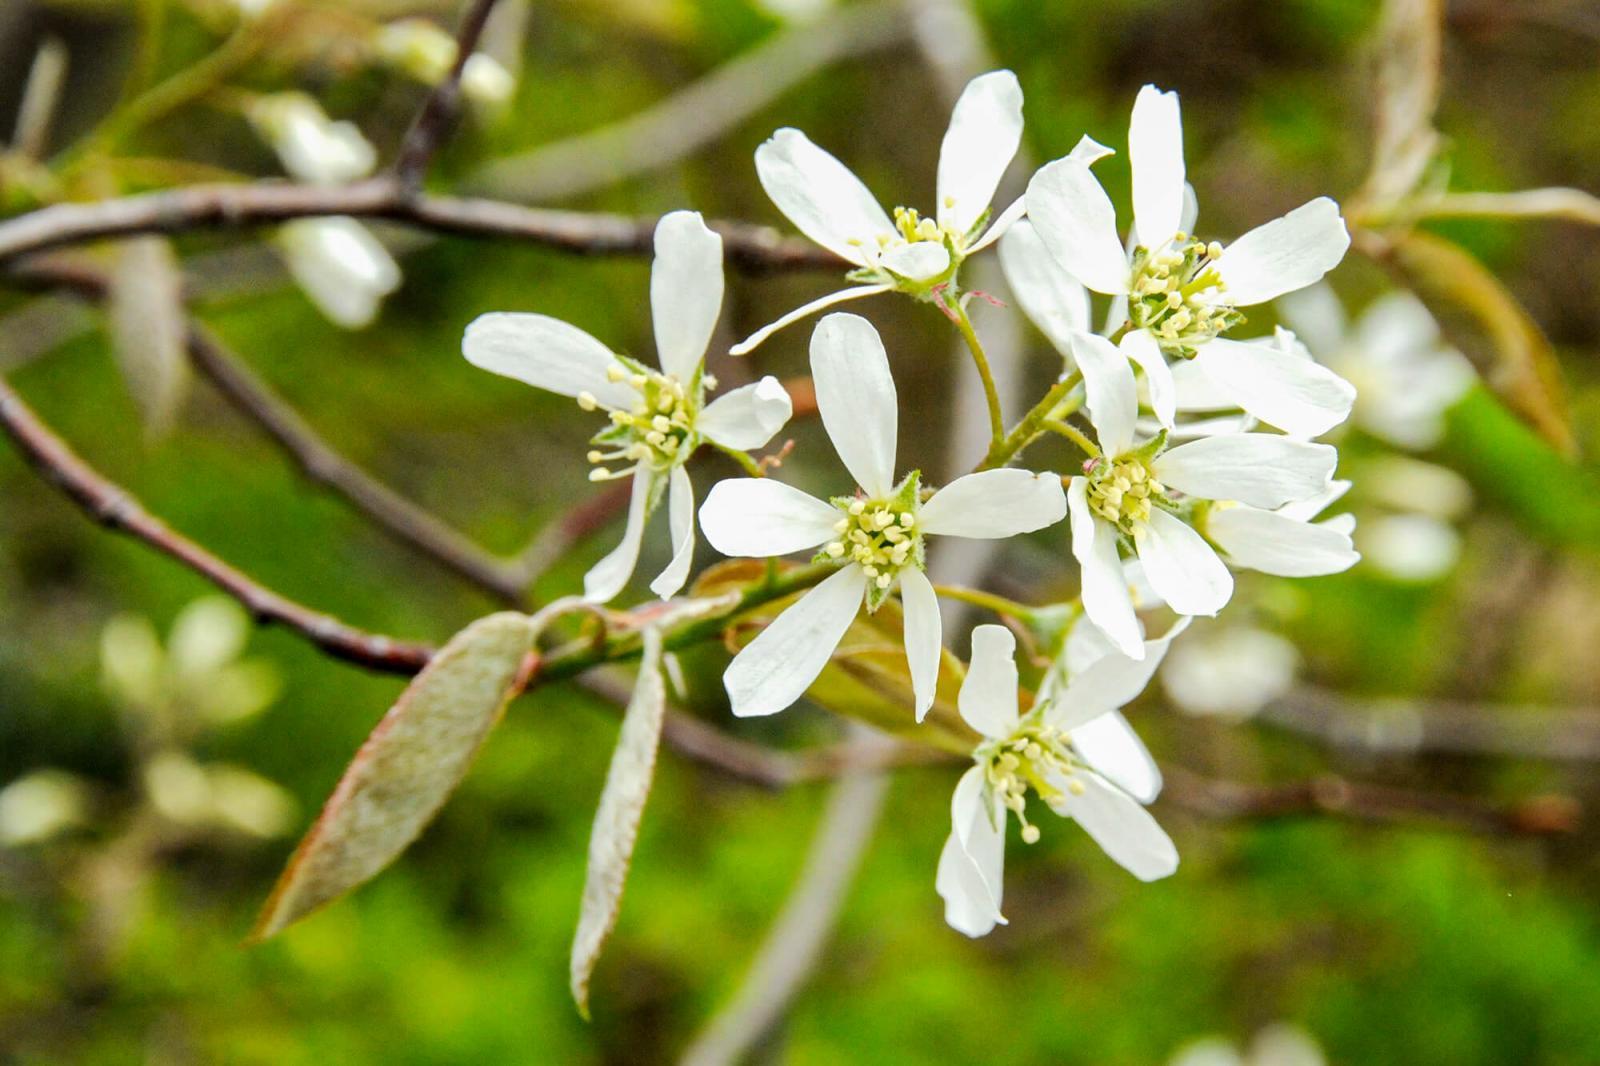 The serviceberry is an early spring bloomer.